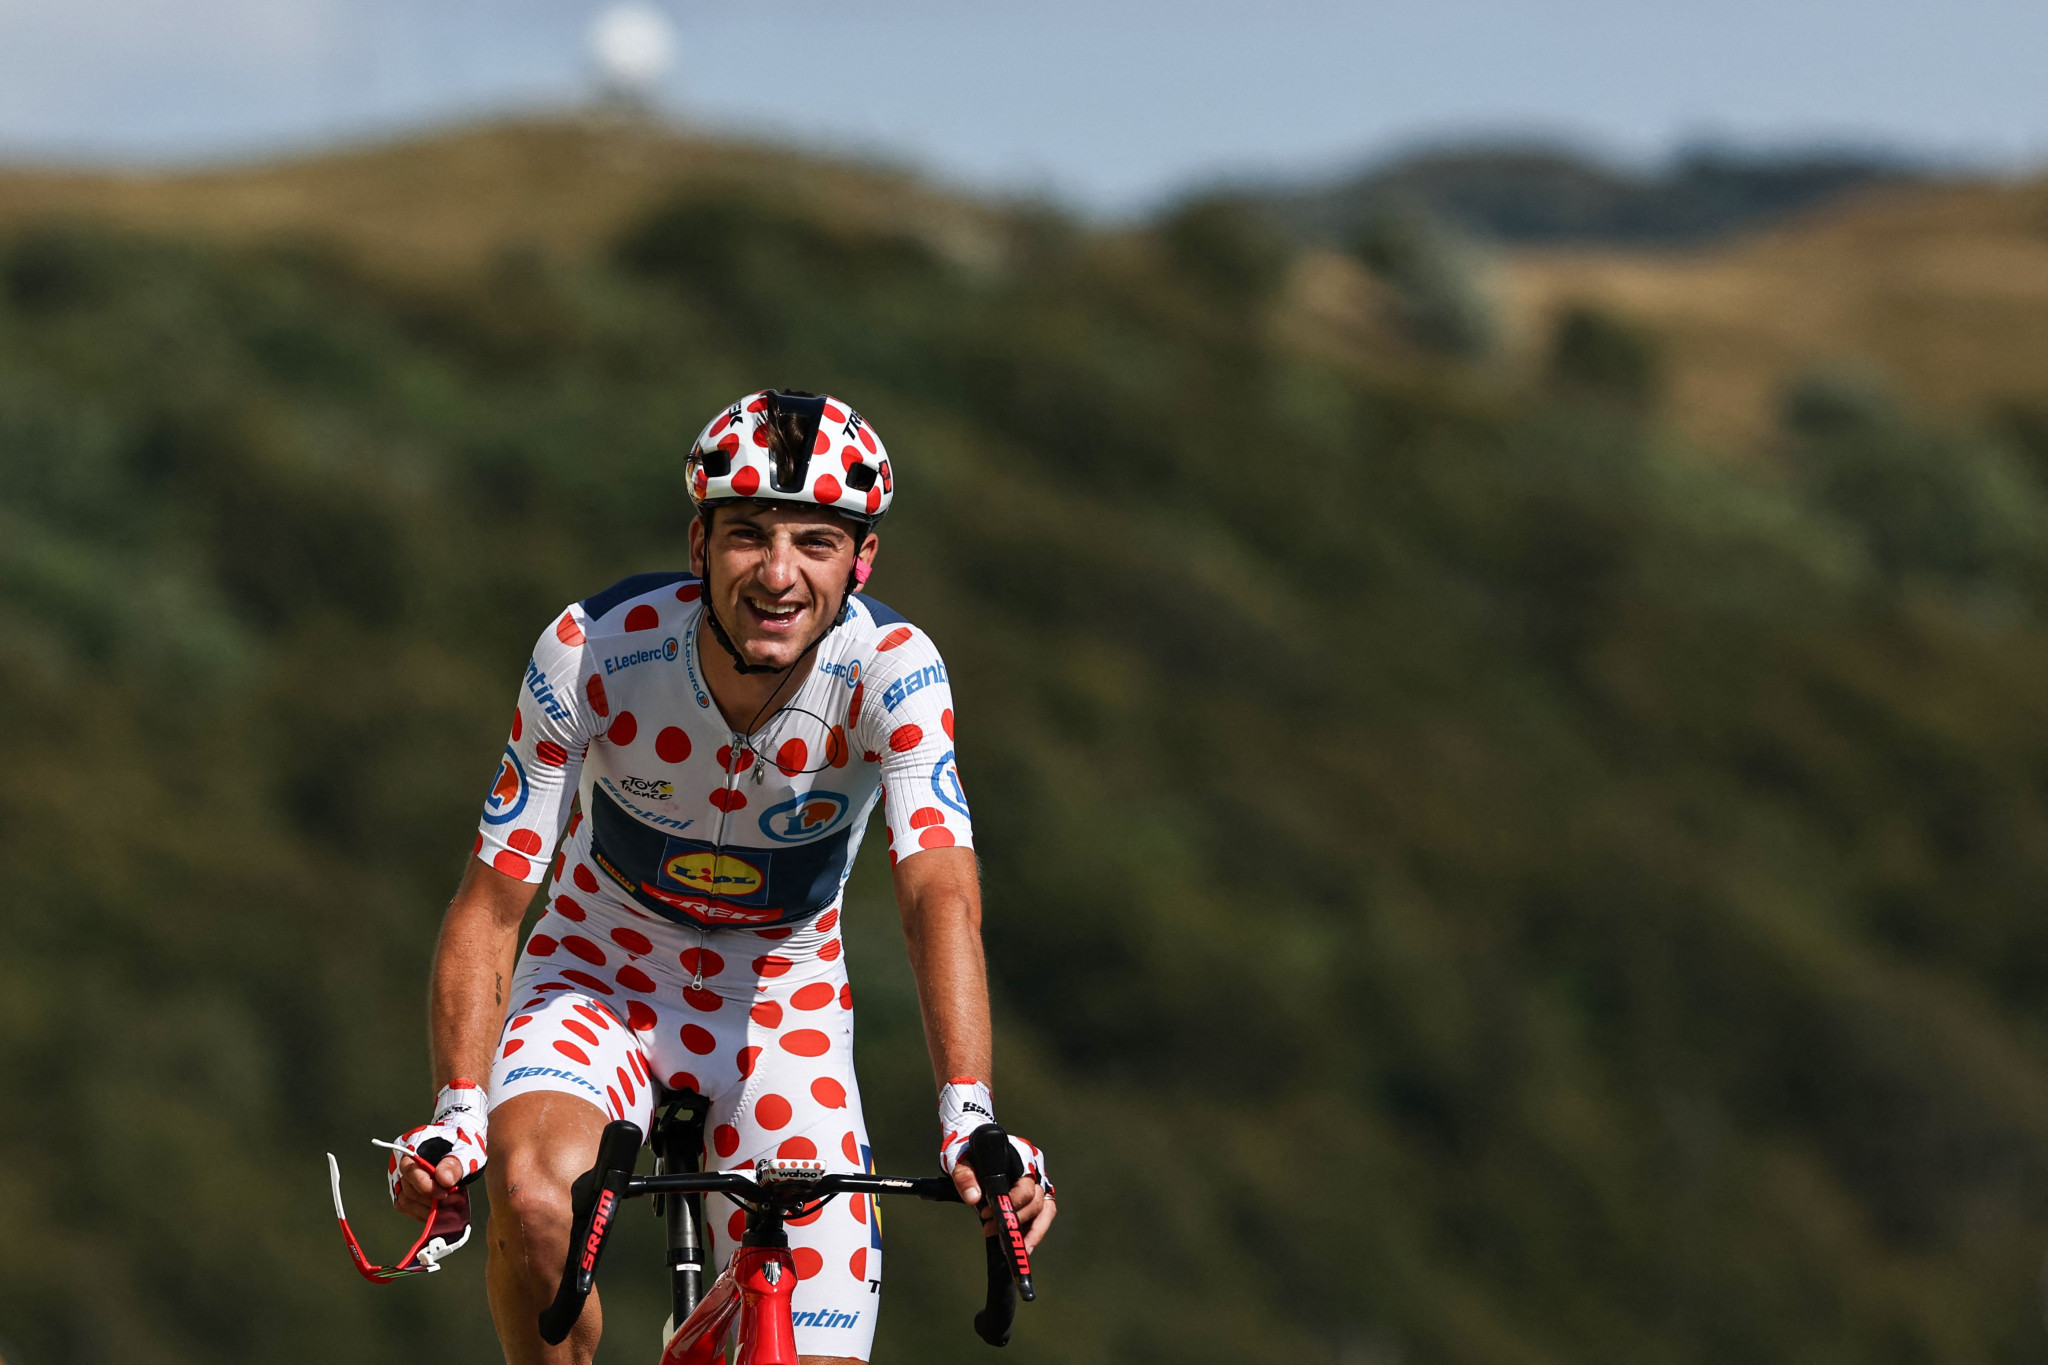 Italy's Giulio Ciccone sealed the polka dot jersey for topping the mountain classification ©Getty Images